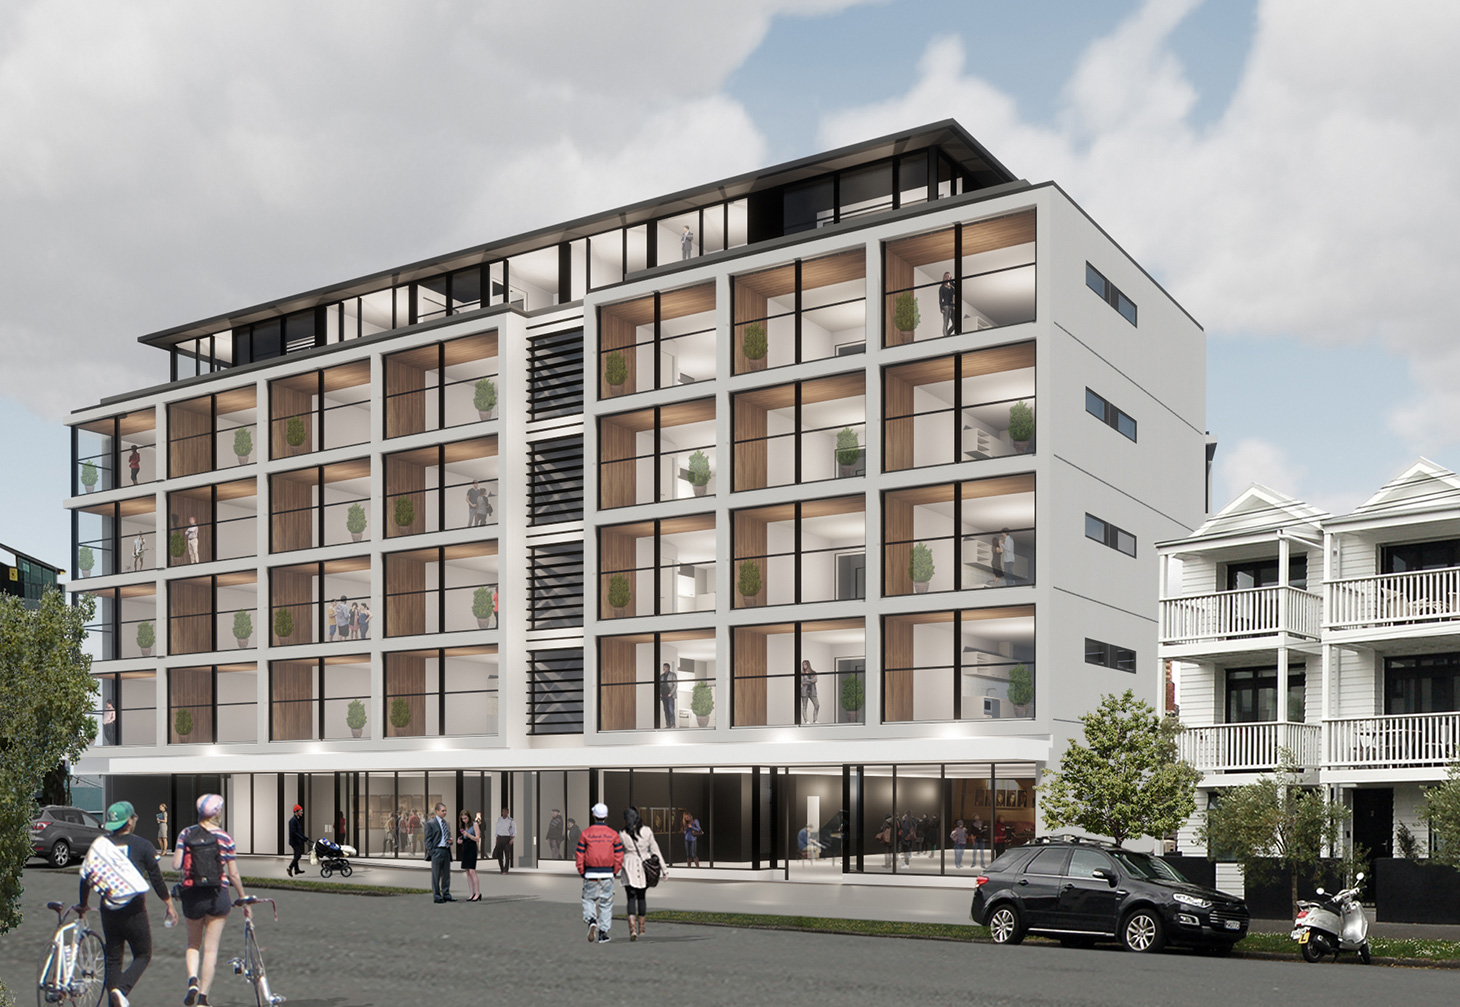 Rose Rd Apartments render by HMOA